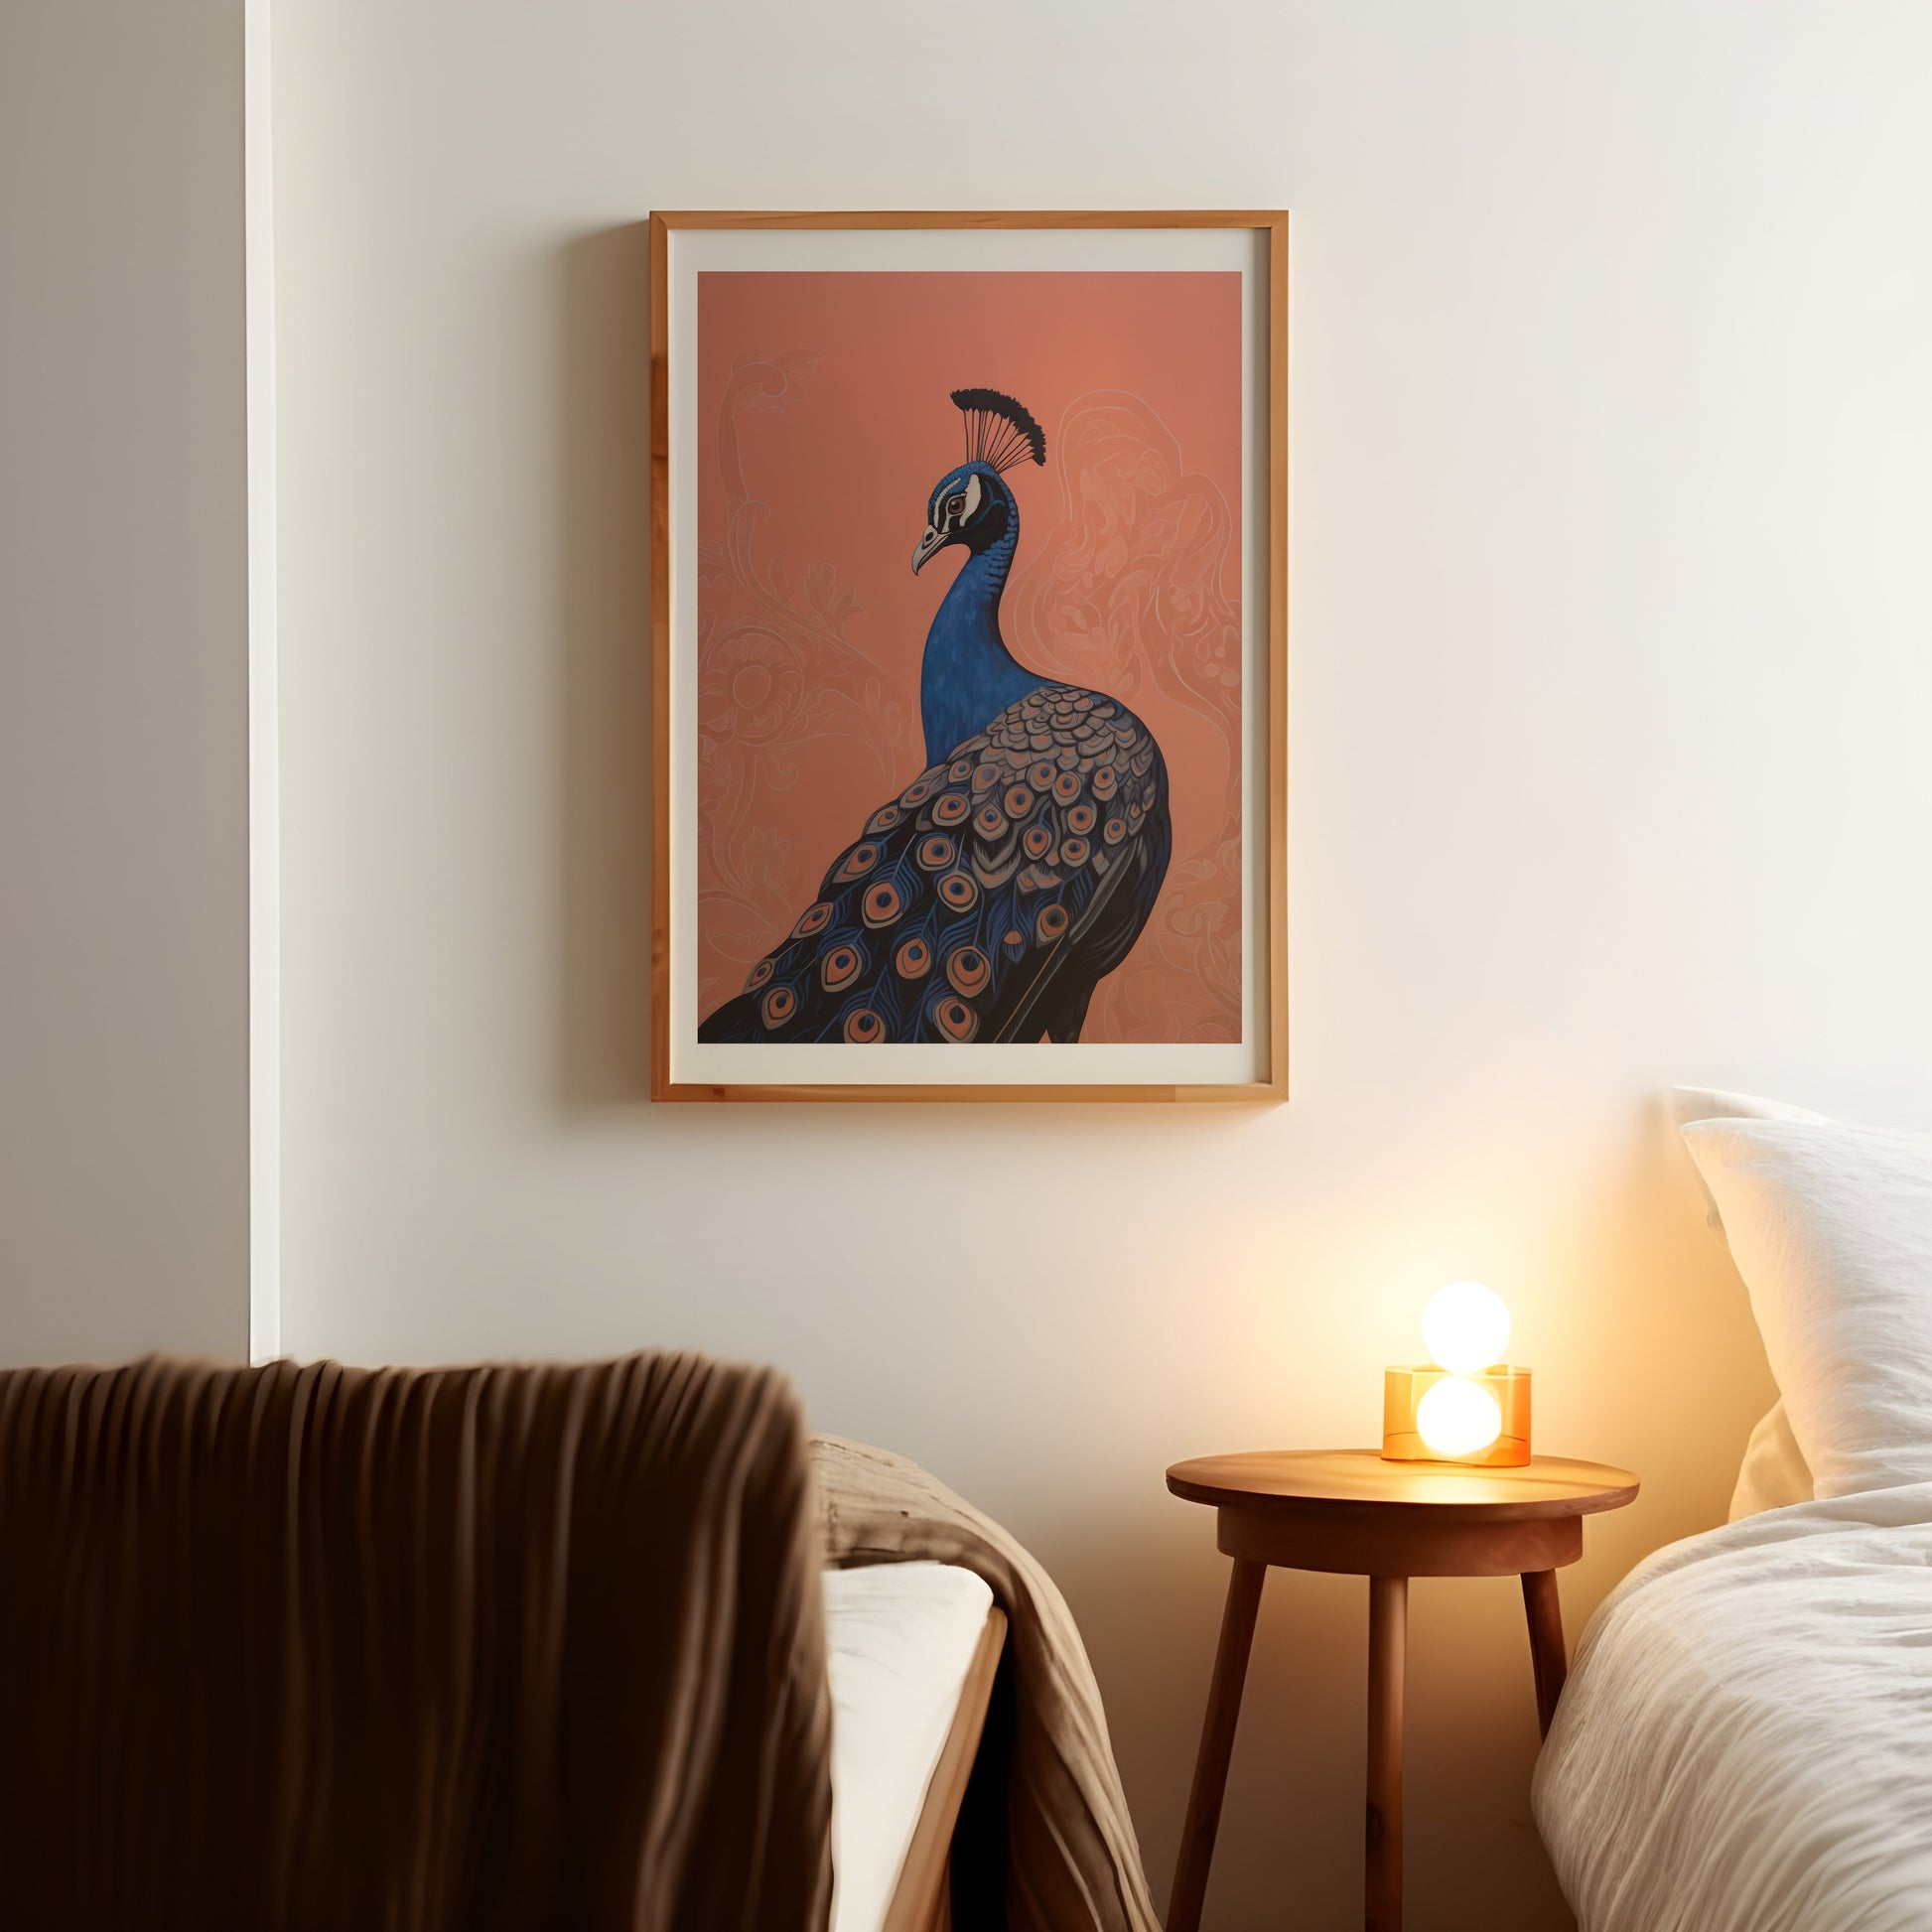 a picture of a peacock on a wall above a bed